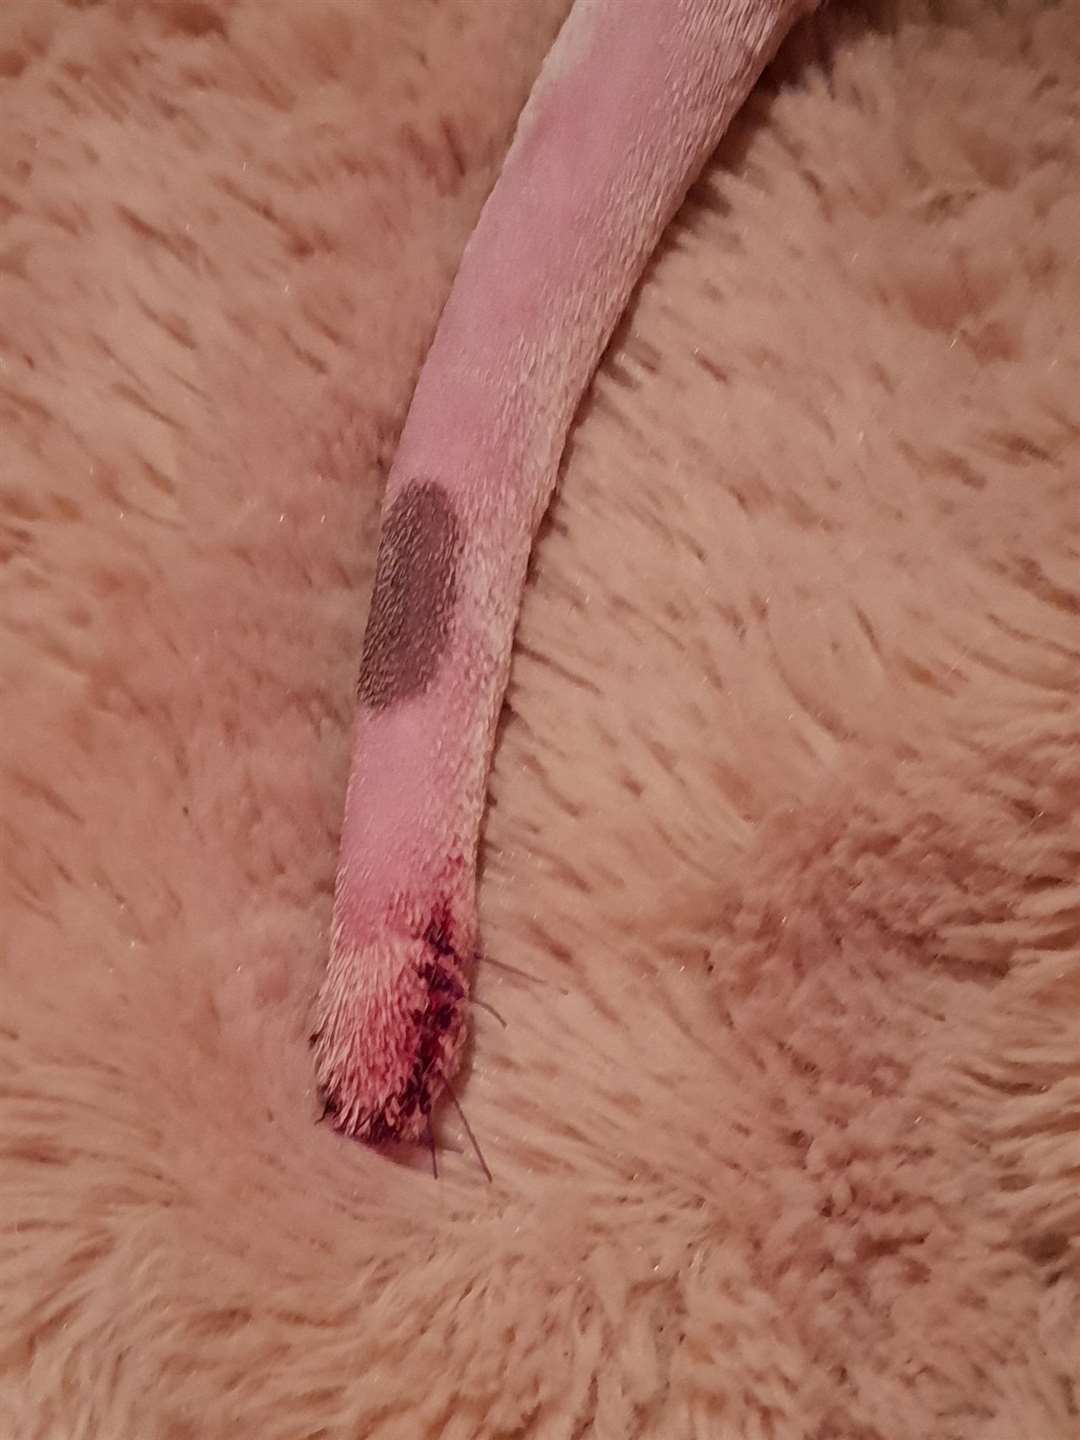 Bullseye had to have part of his tail amputated after the attack.